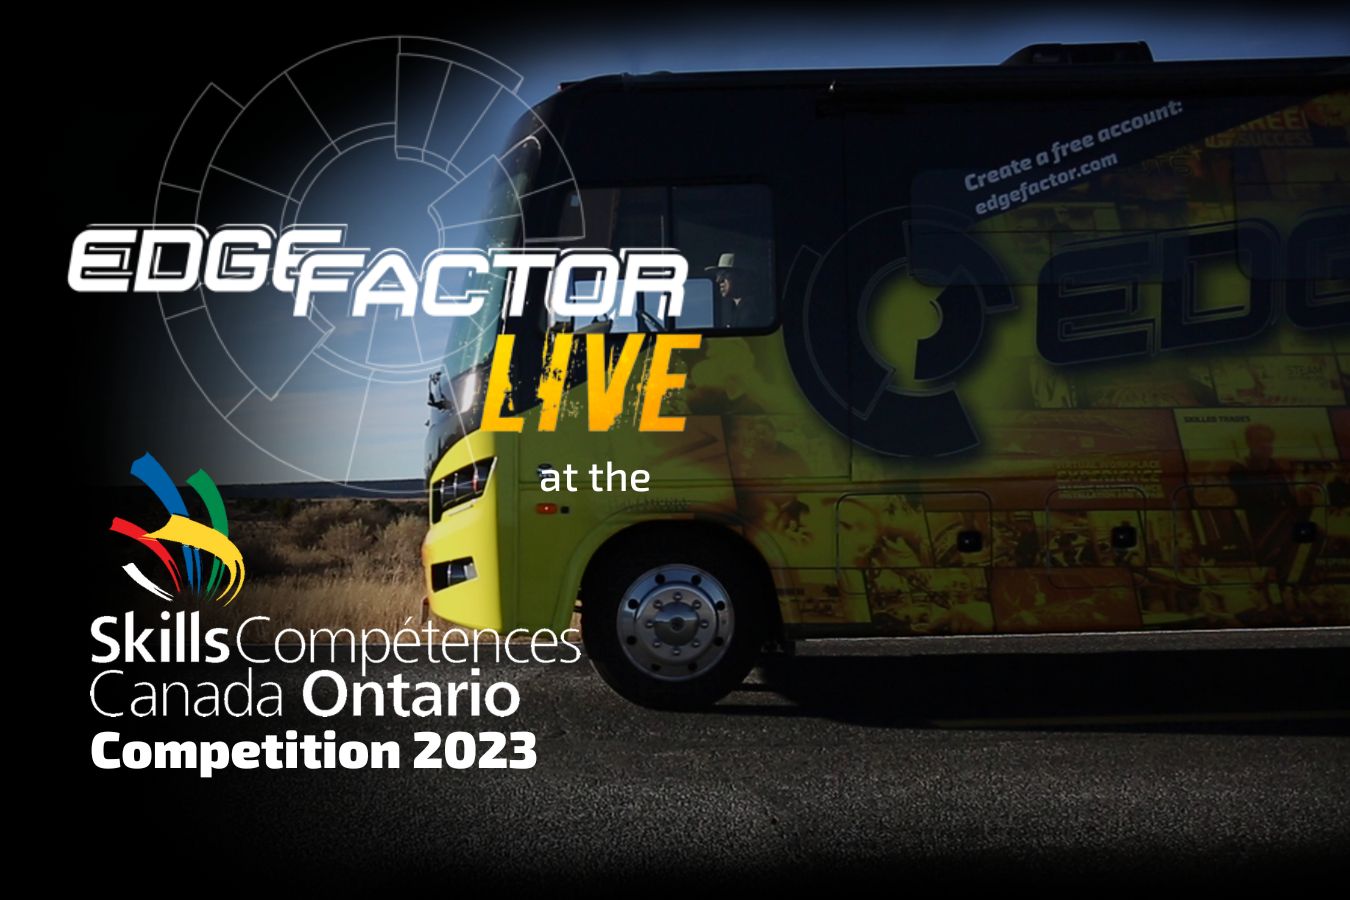 Edge Factor will be live at Skills Ontario Competition in Toronto 